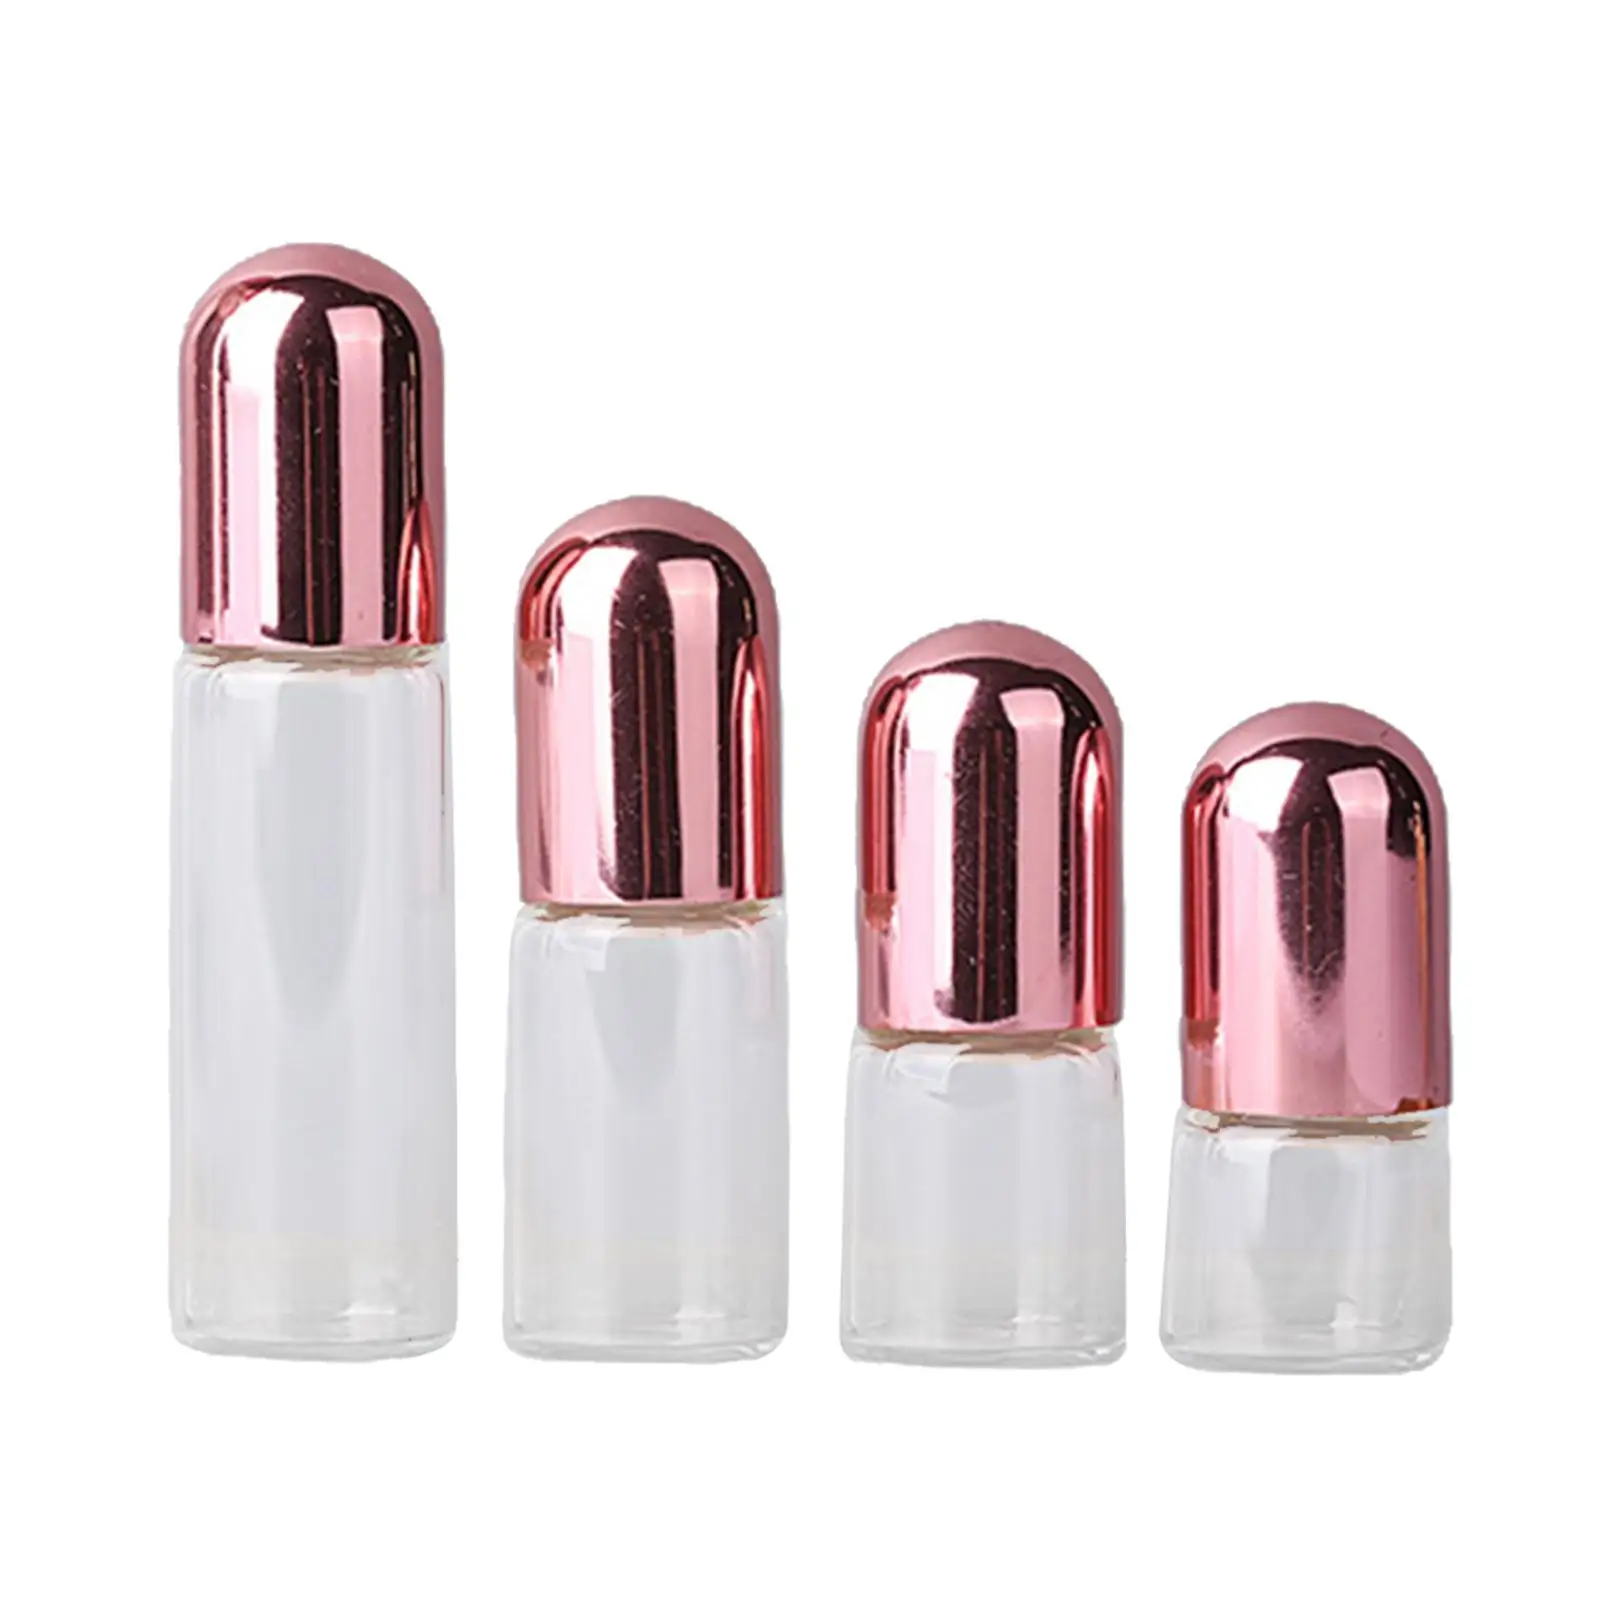 10 Pieces  Oil Roller Bottles with Stainless Steel Roller Balls Mini Clear Portable Practical Glass Roll On Bottle